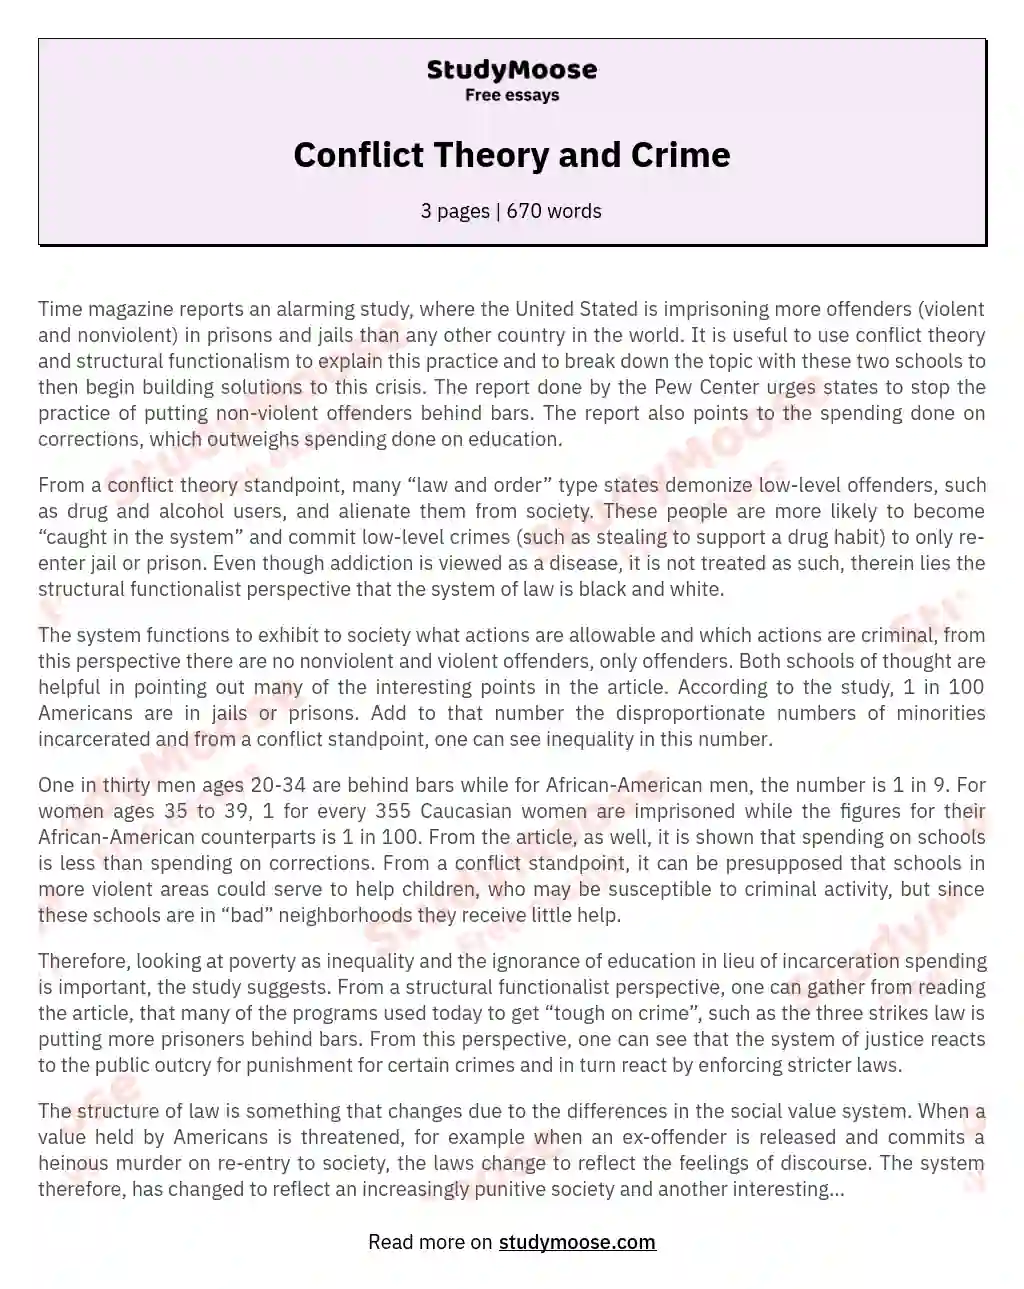 essay on conflict theory